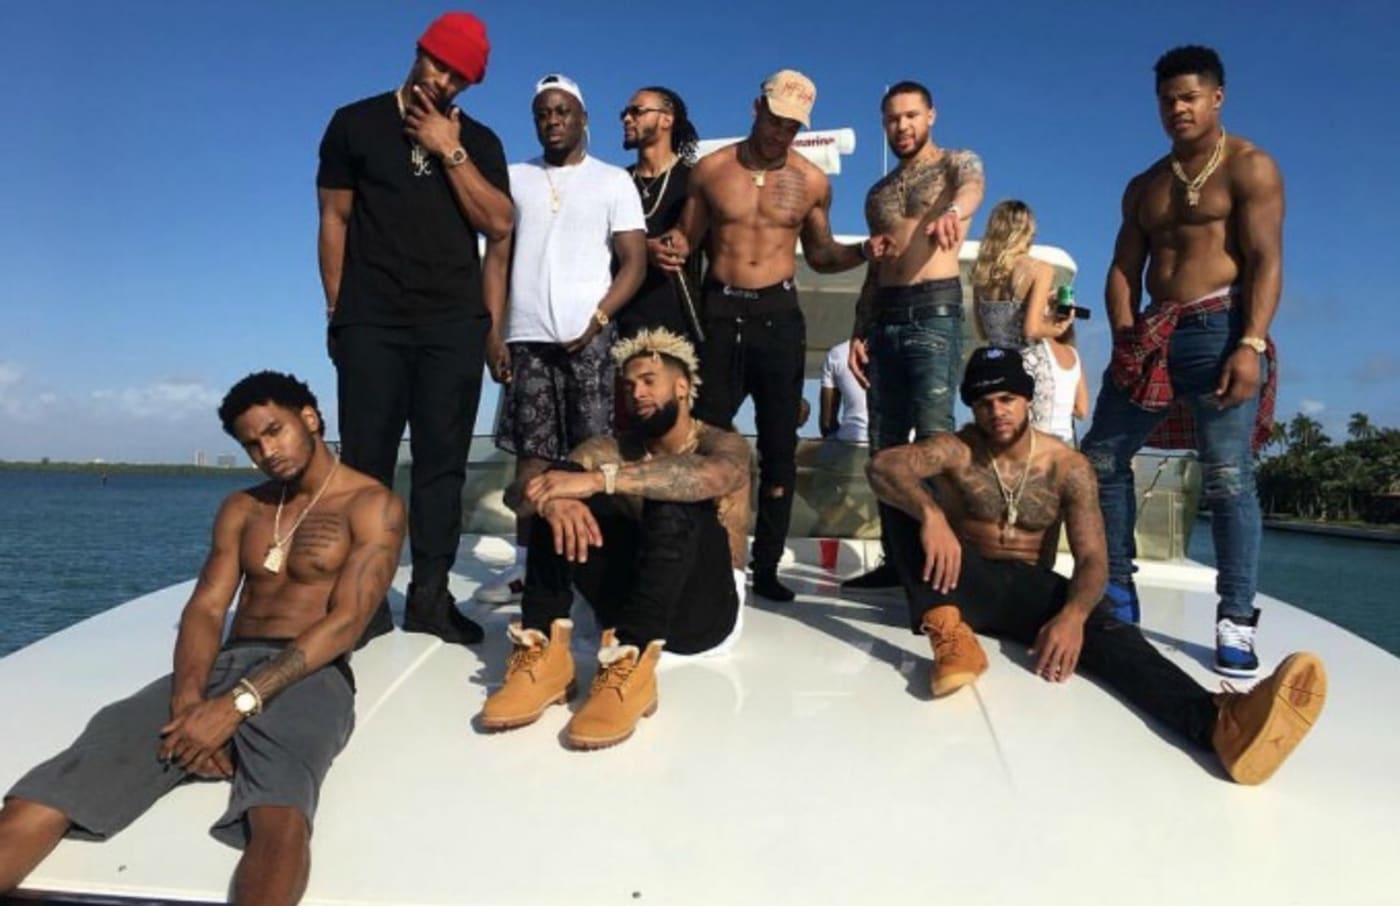 NY Giants players hang out on a boat.